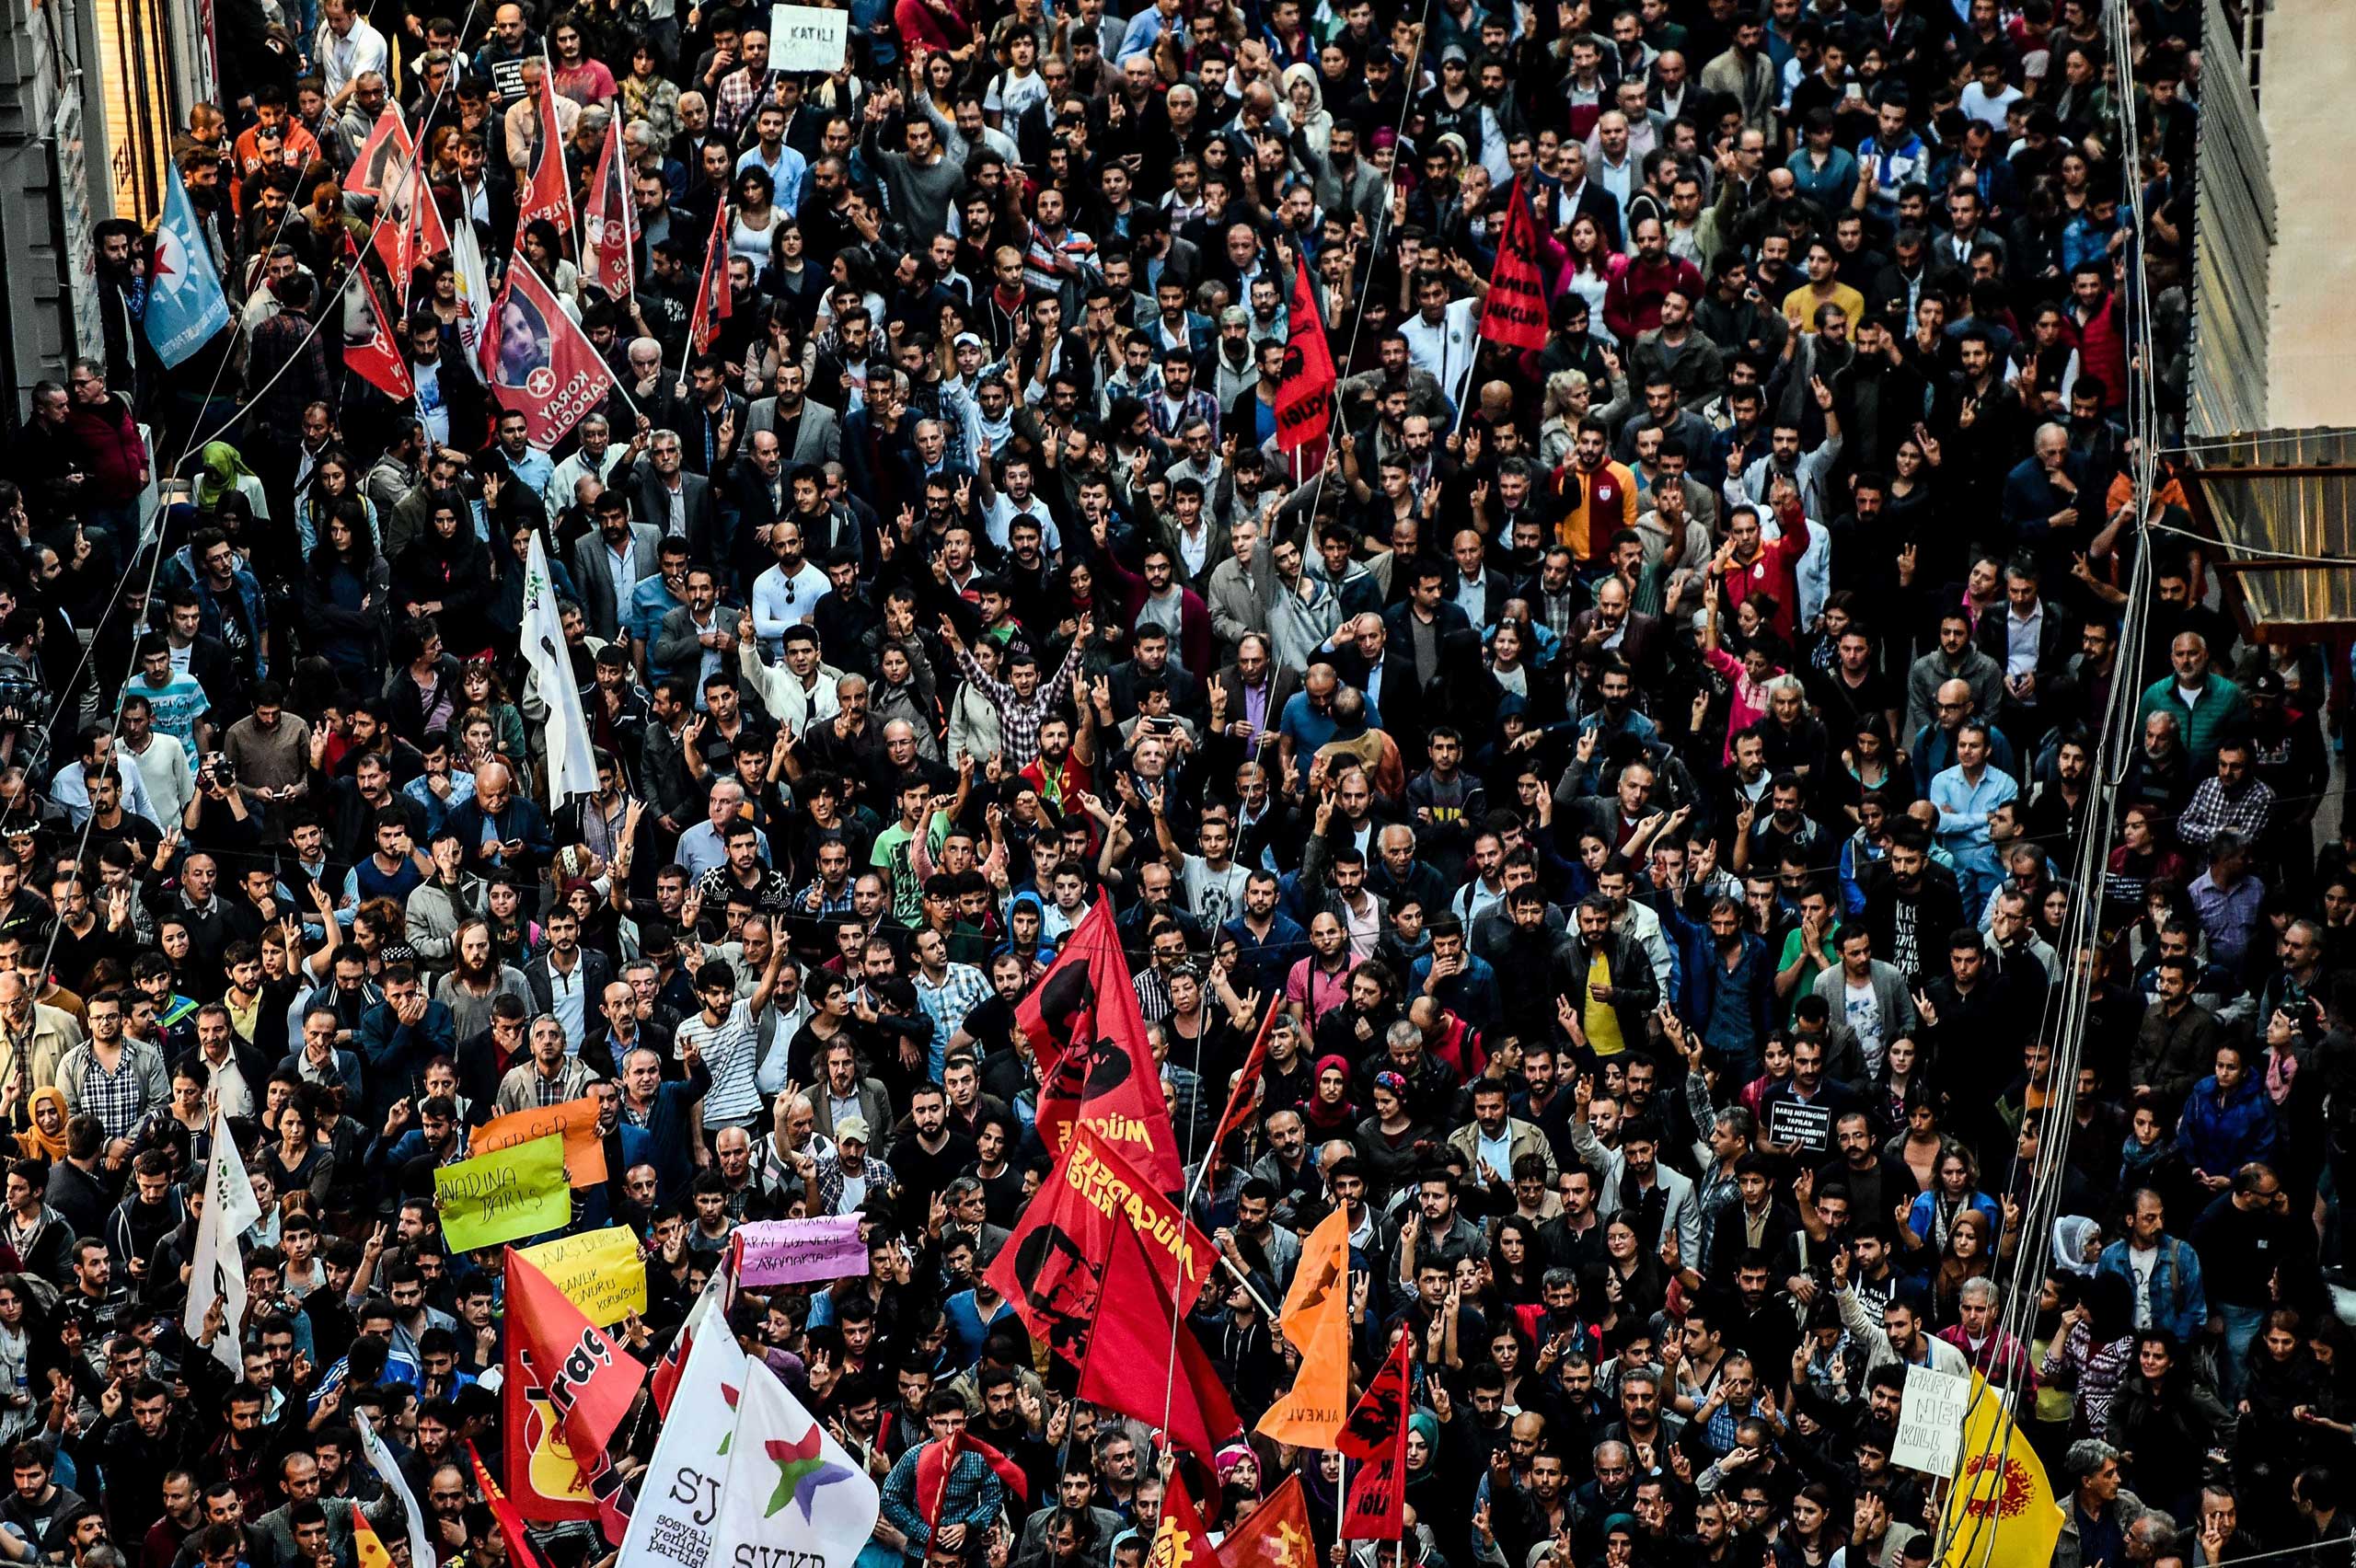 Thousands of protesters take part in a march against the deadly attack earlier in Ankara on Oct. 10, 2015 at the Istiklal avenue in Istanbul. (Ozan Kose—AFP/Getty Images)